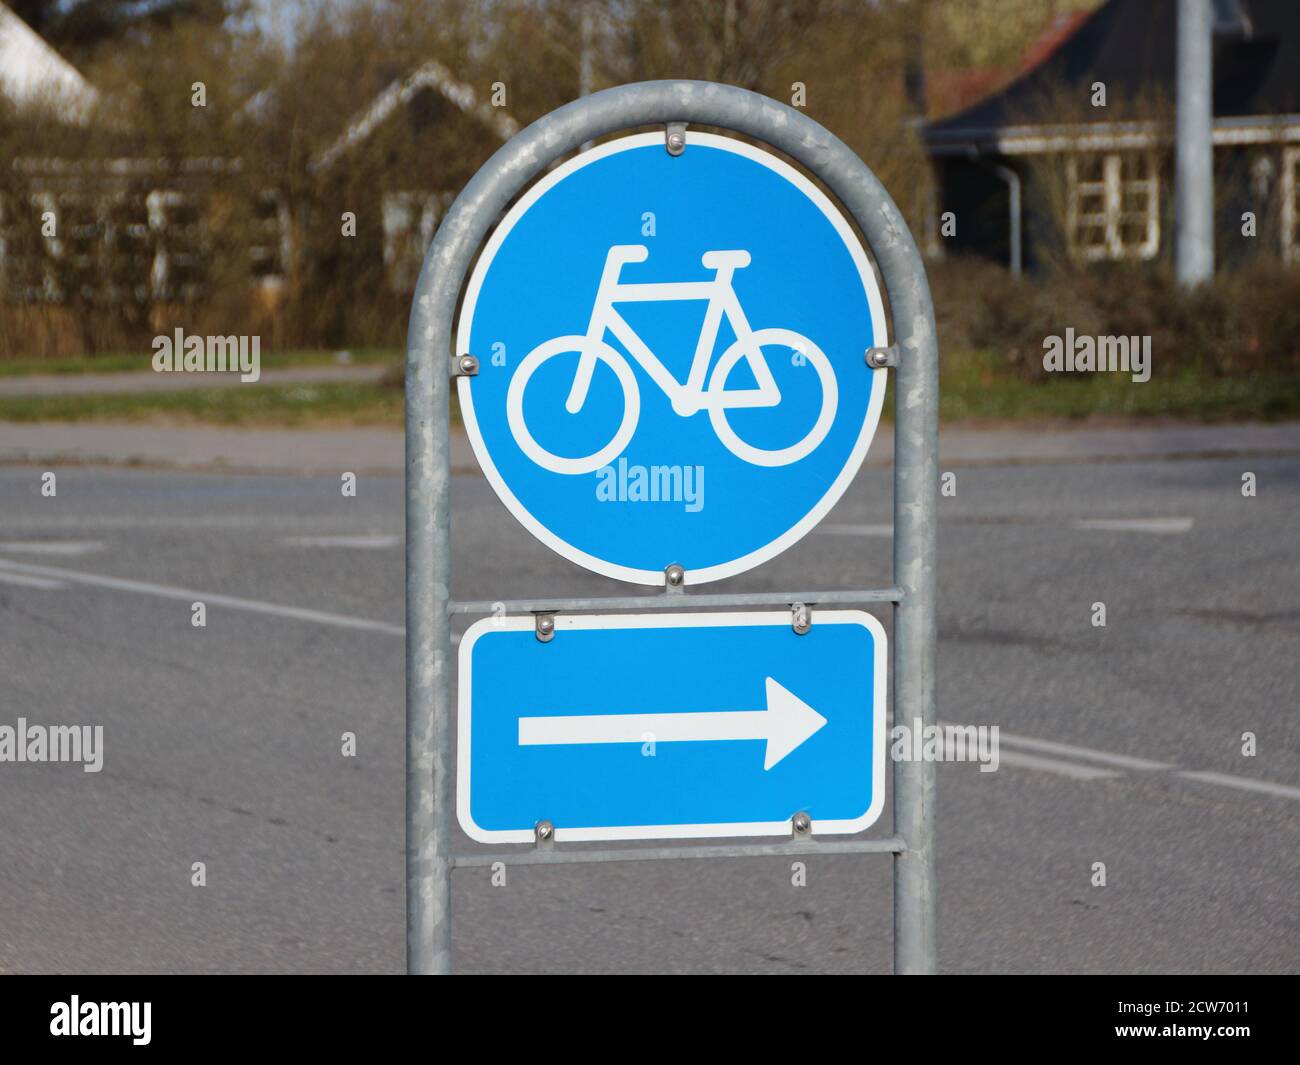 A blue traffic road sign signifying a right turn for bicycles. Stock Photo